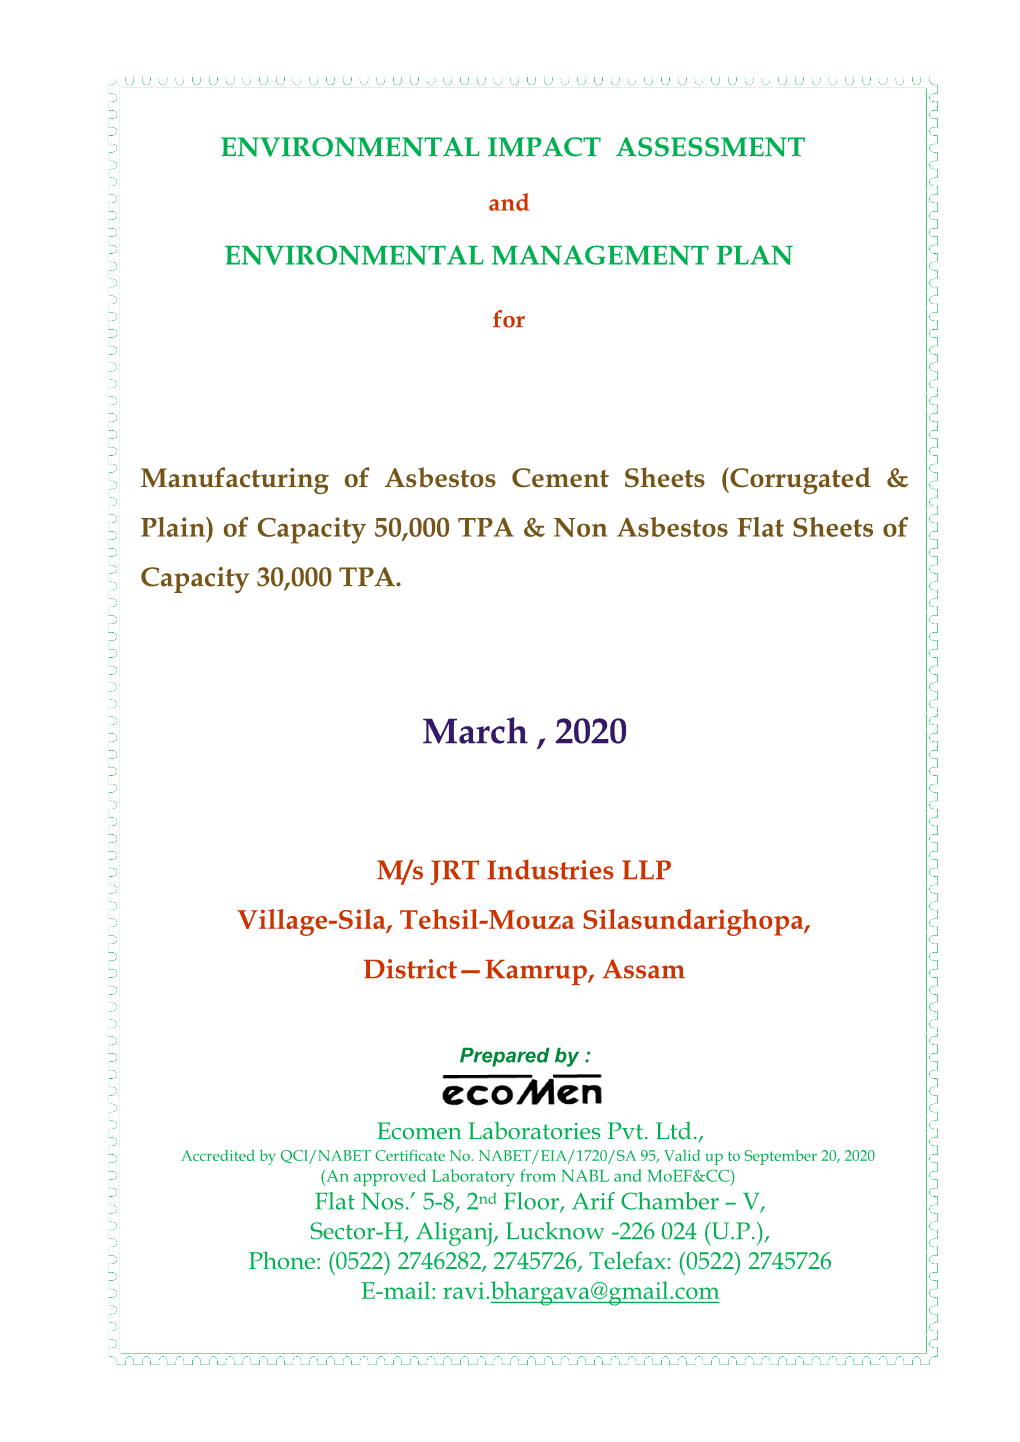 Chapter-1 EIA/EMP of M/S JRT INDUSTRIES LLP